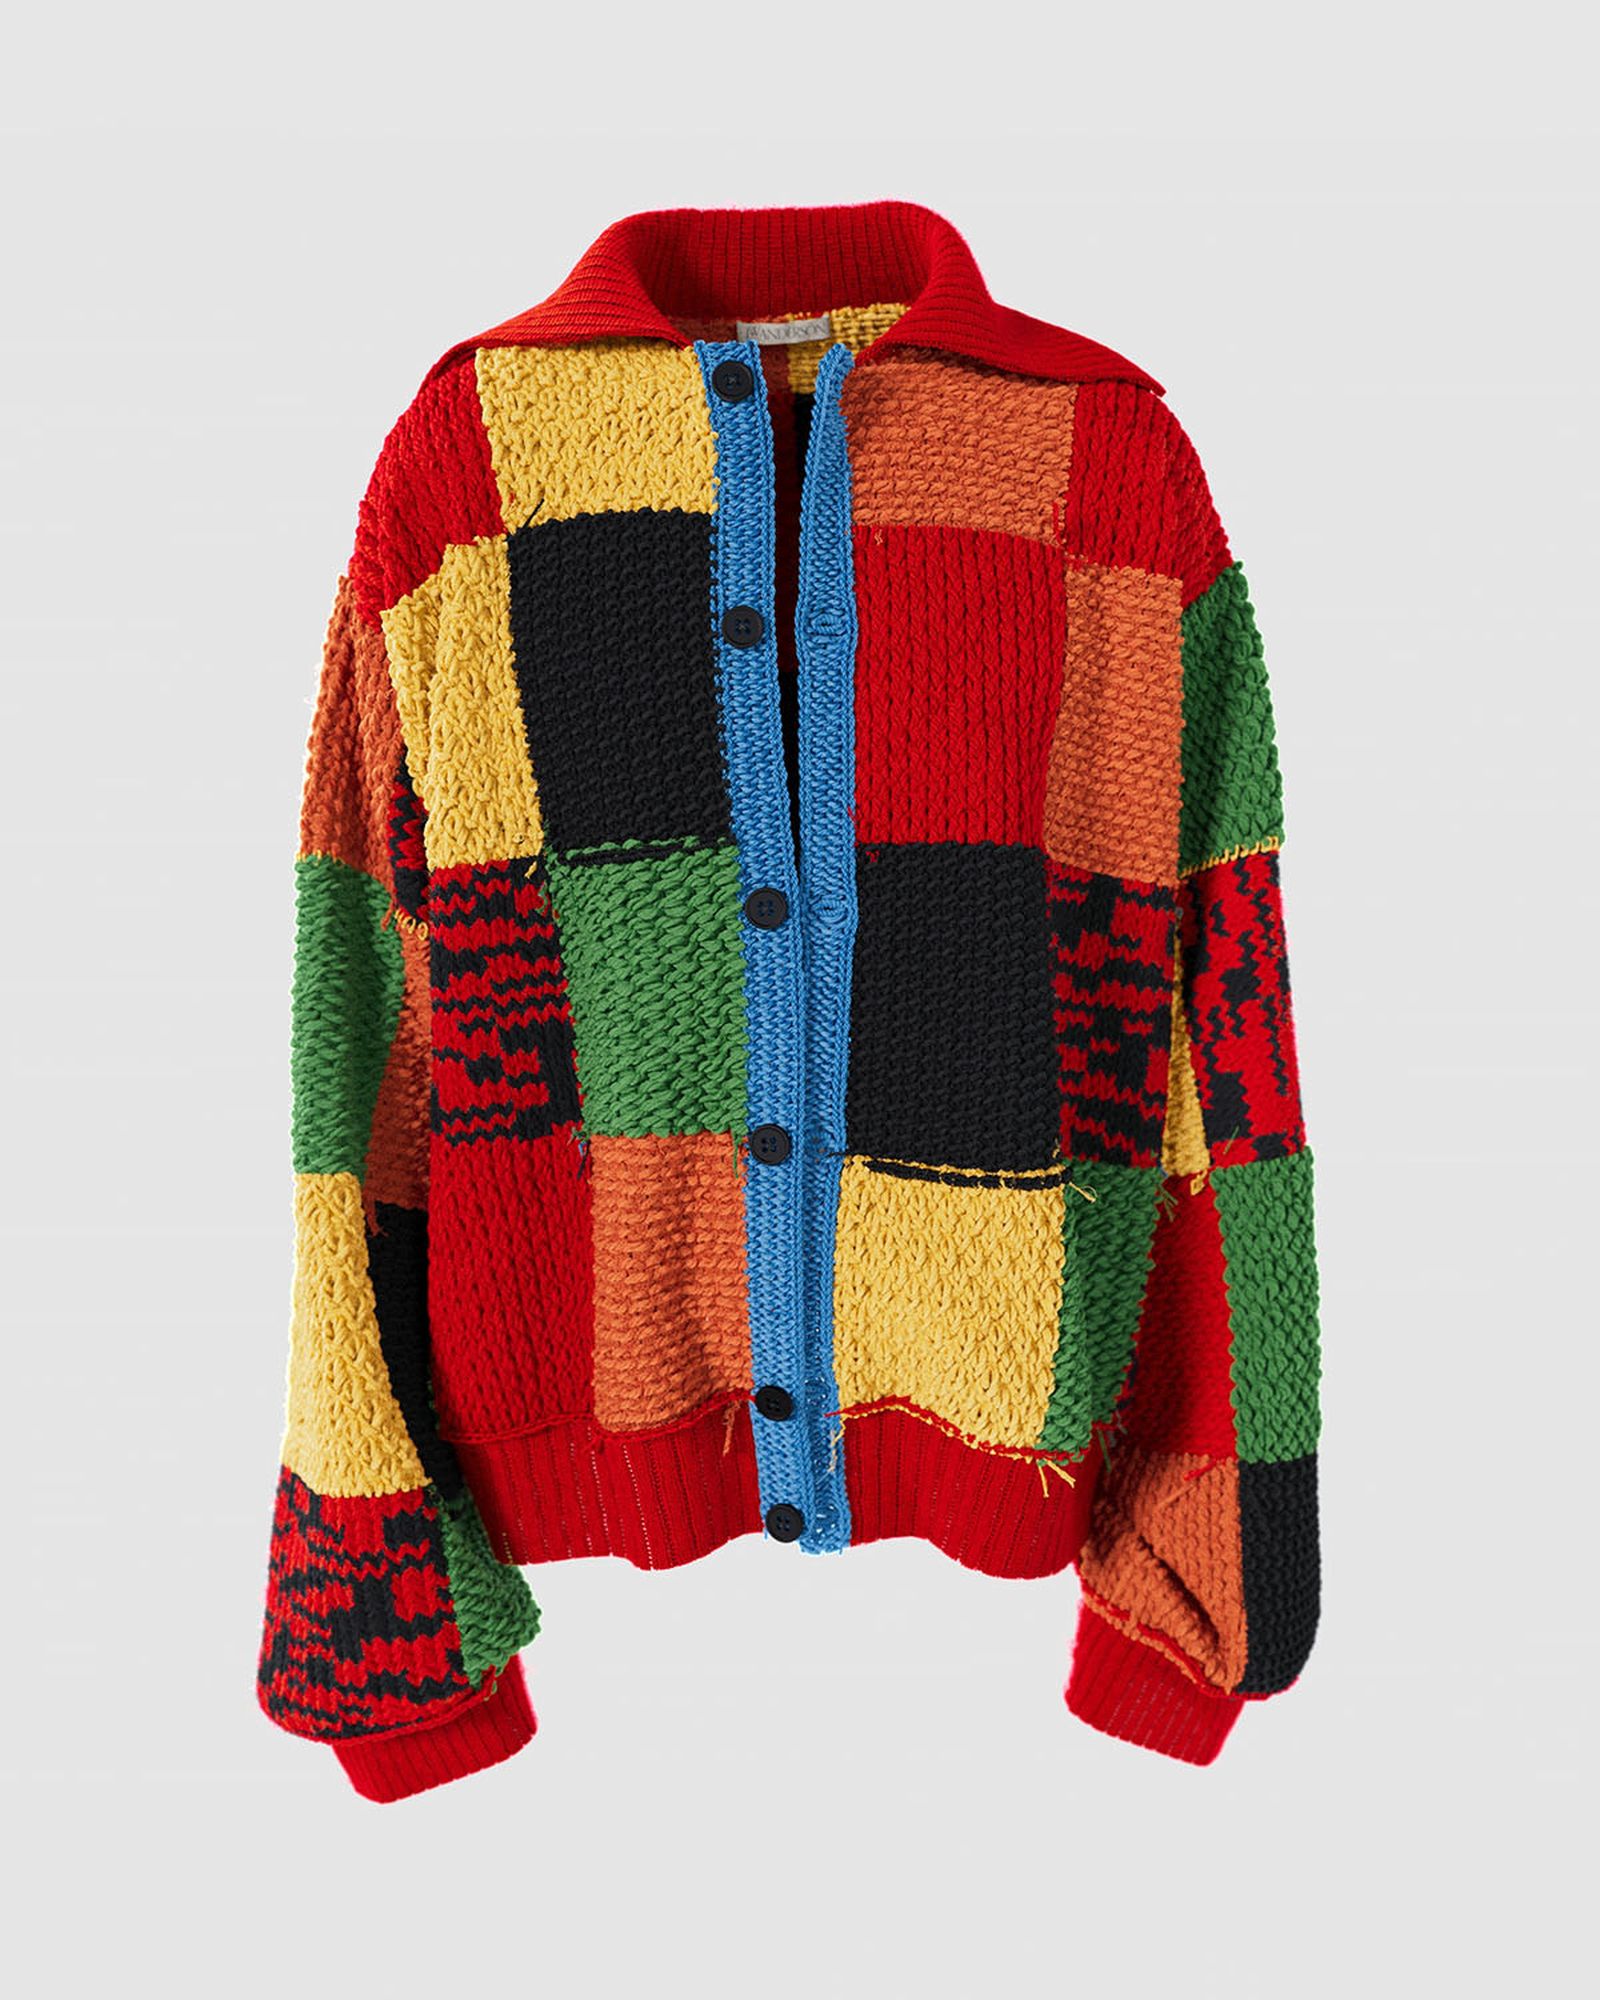 JW Anderson to Auction Harry Styles' Cardigan as NFT